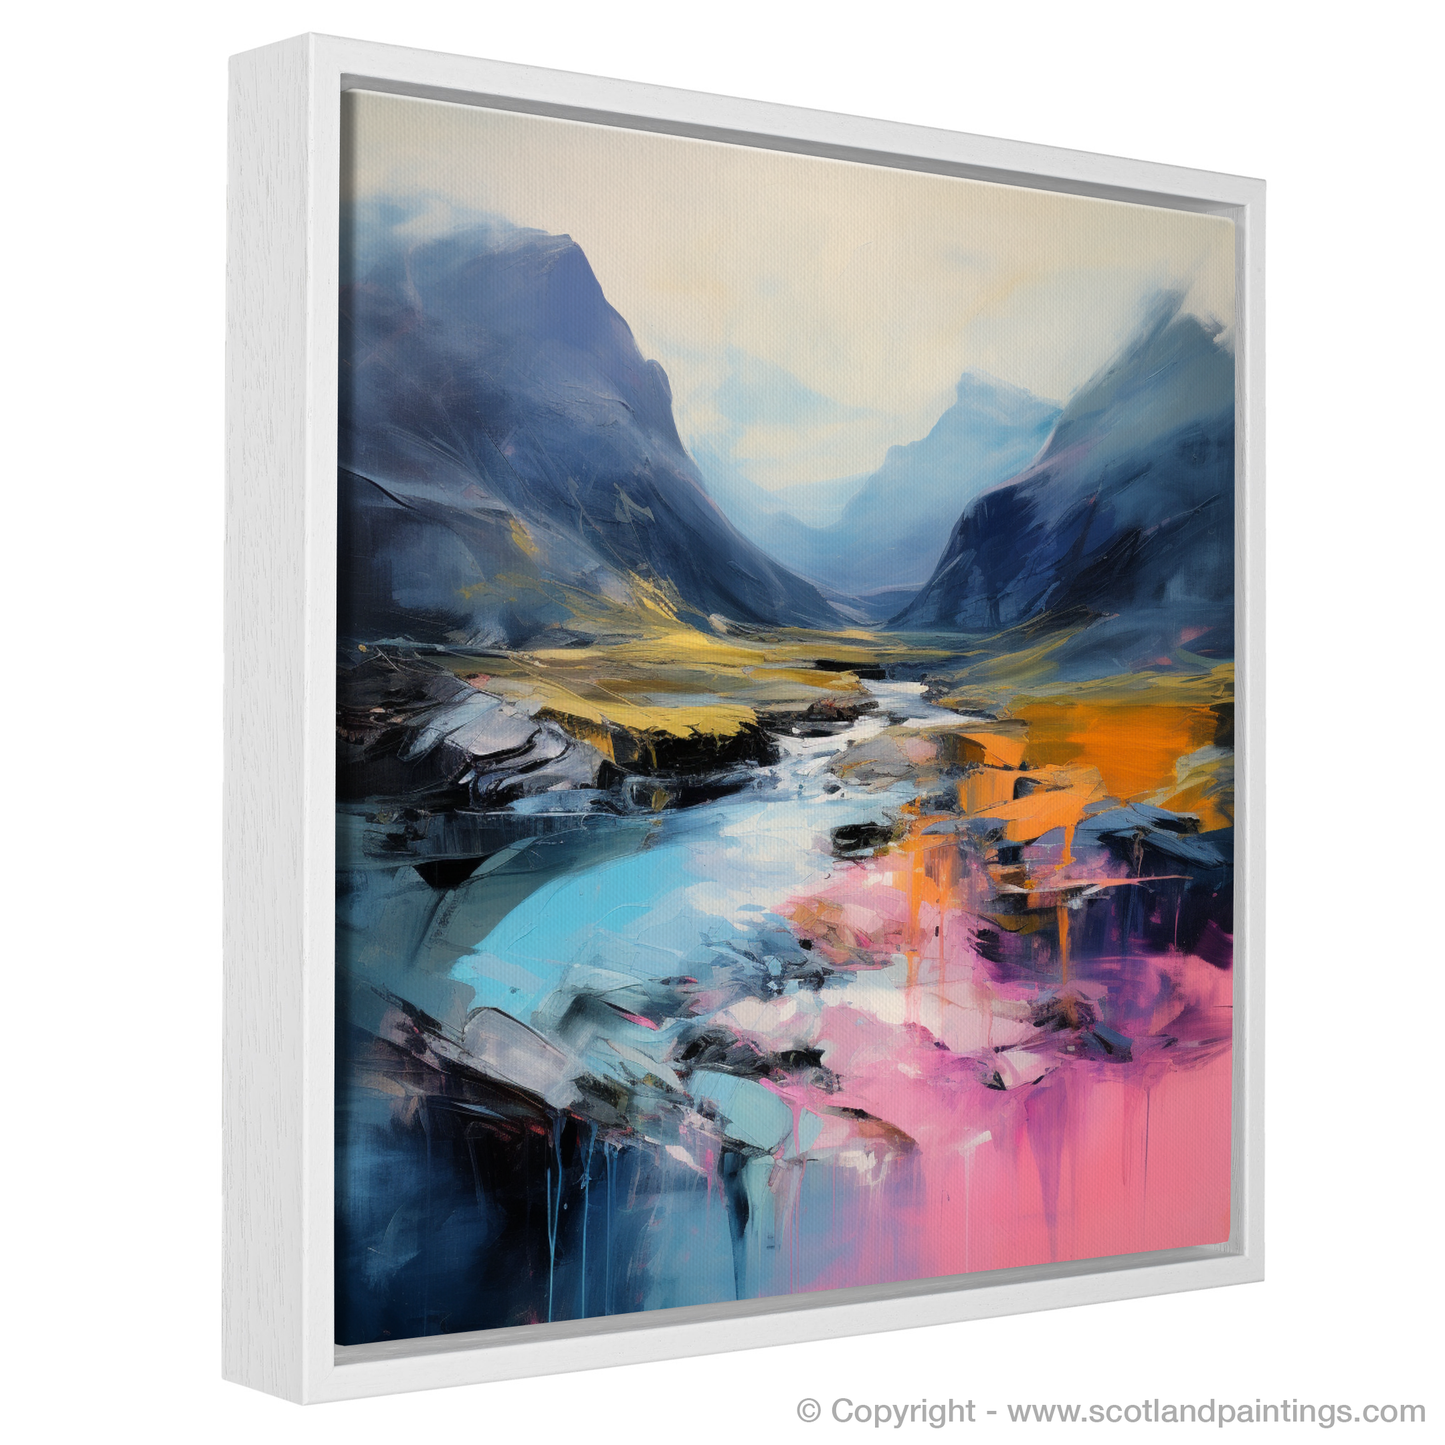 Painting and Art Print of Isle of Skye Fairy Pools at dusk in summer entitled "Dusk Embrace at Fairy Pools".